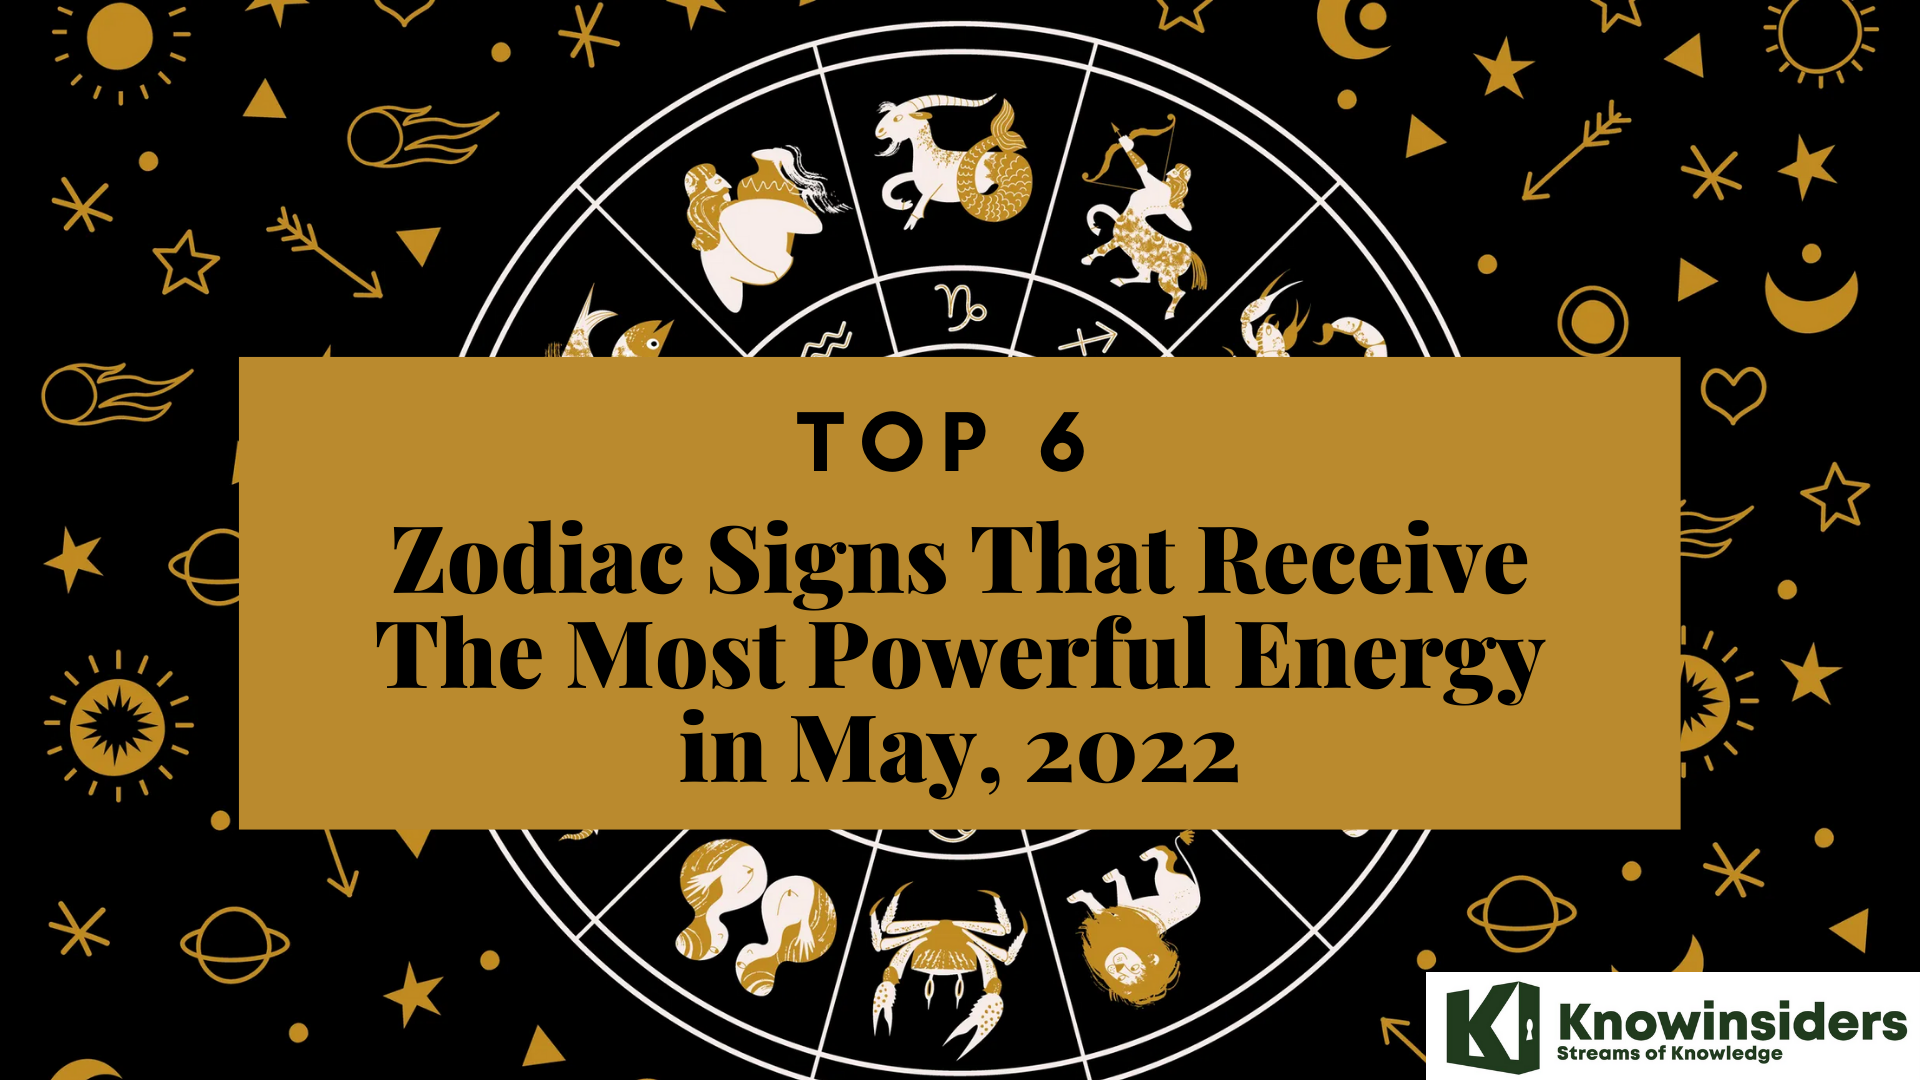 Top 6 Zodiac Signs That Receive The Most Powerful Energy in May, 2022